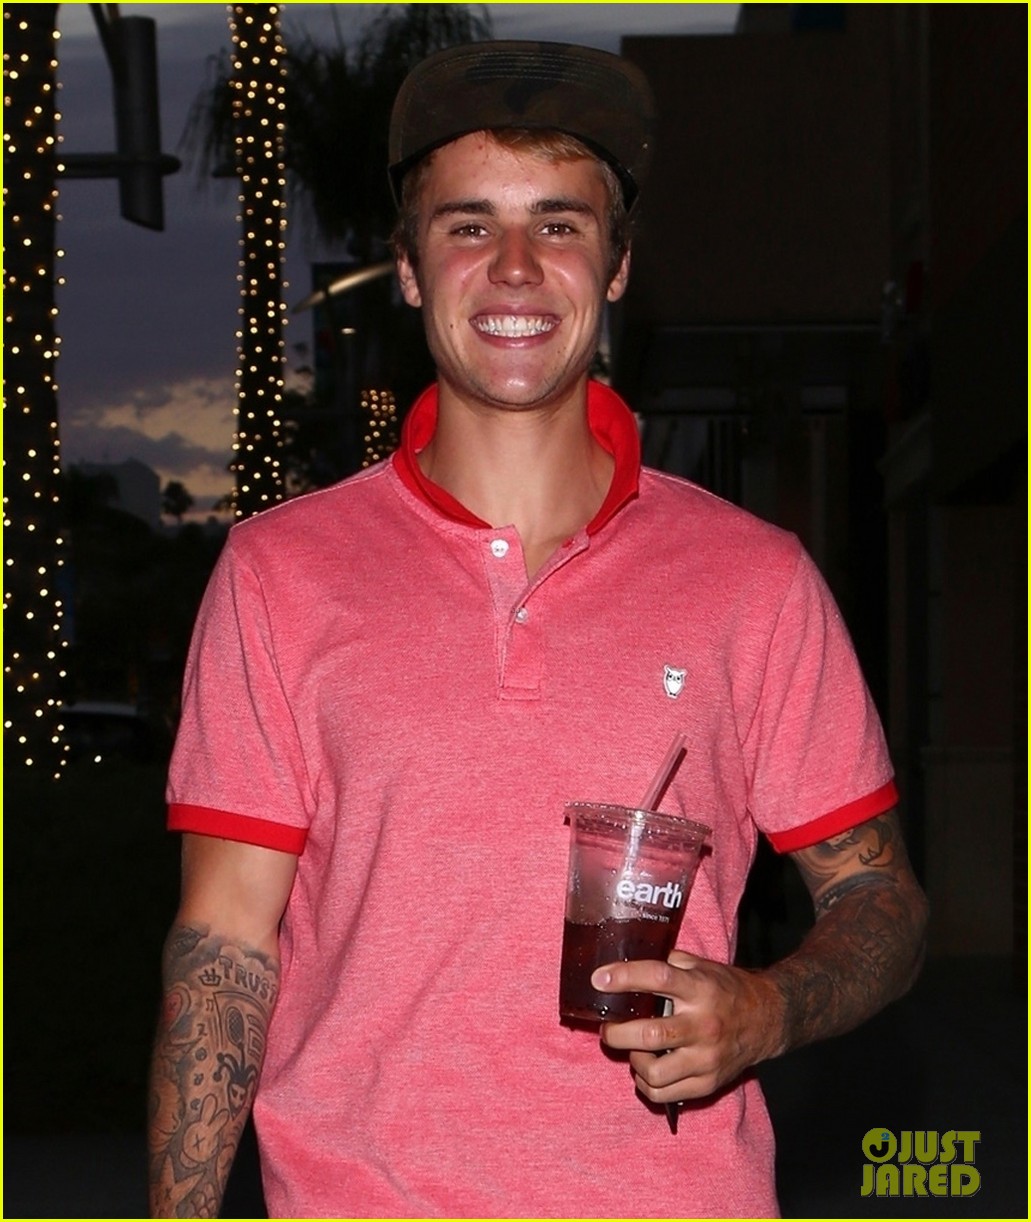 justin-bieber-has-the-most-infectious-smile-04